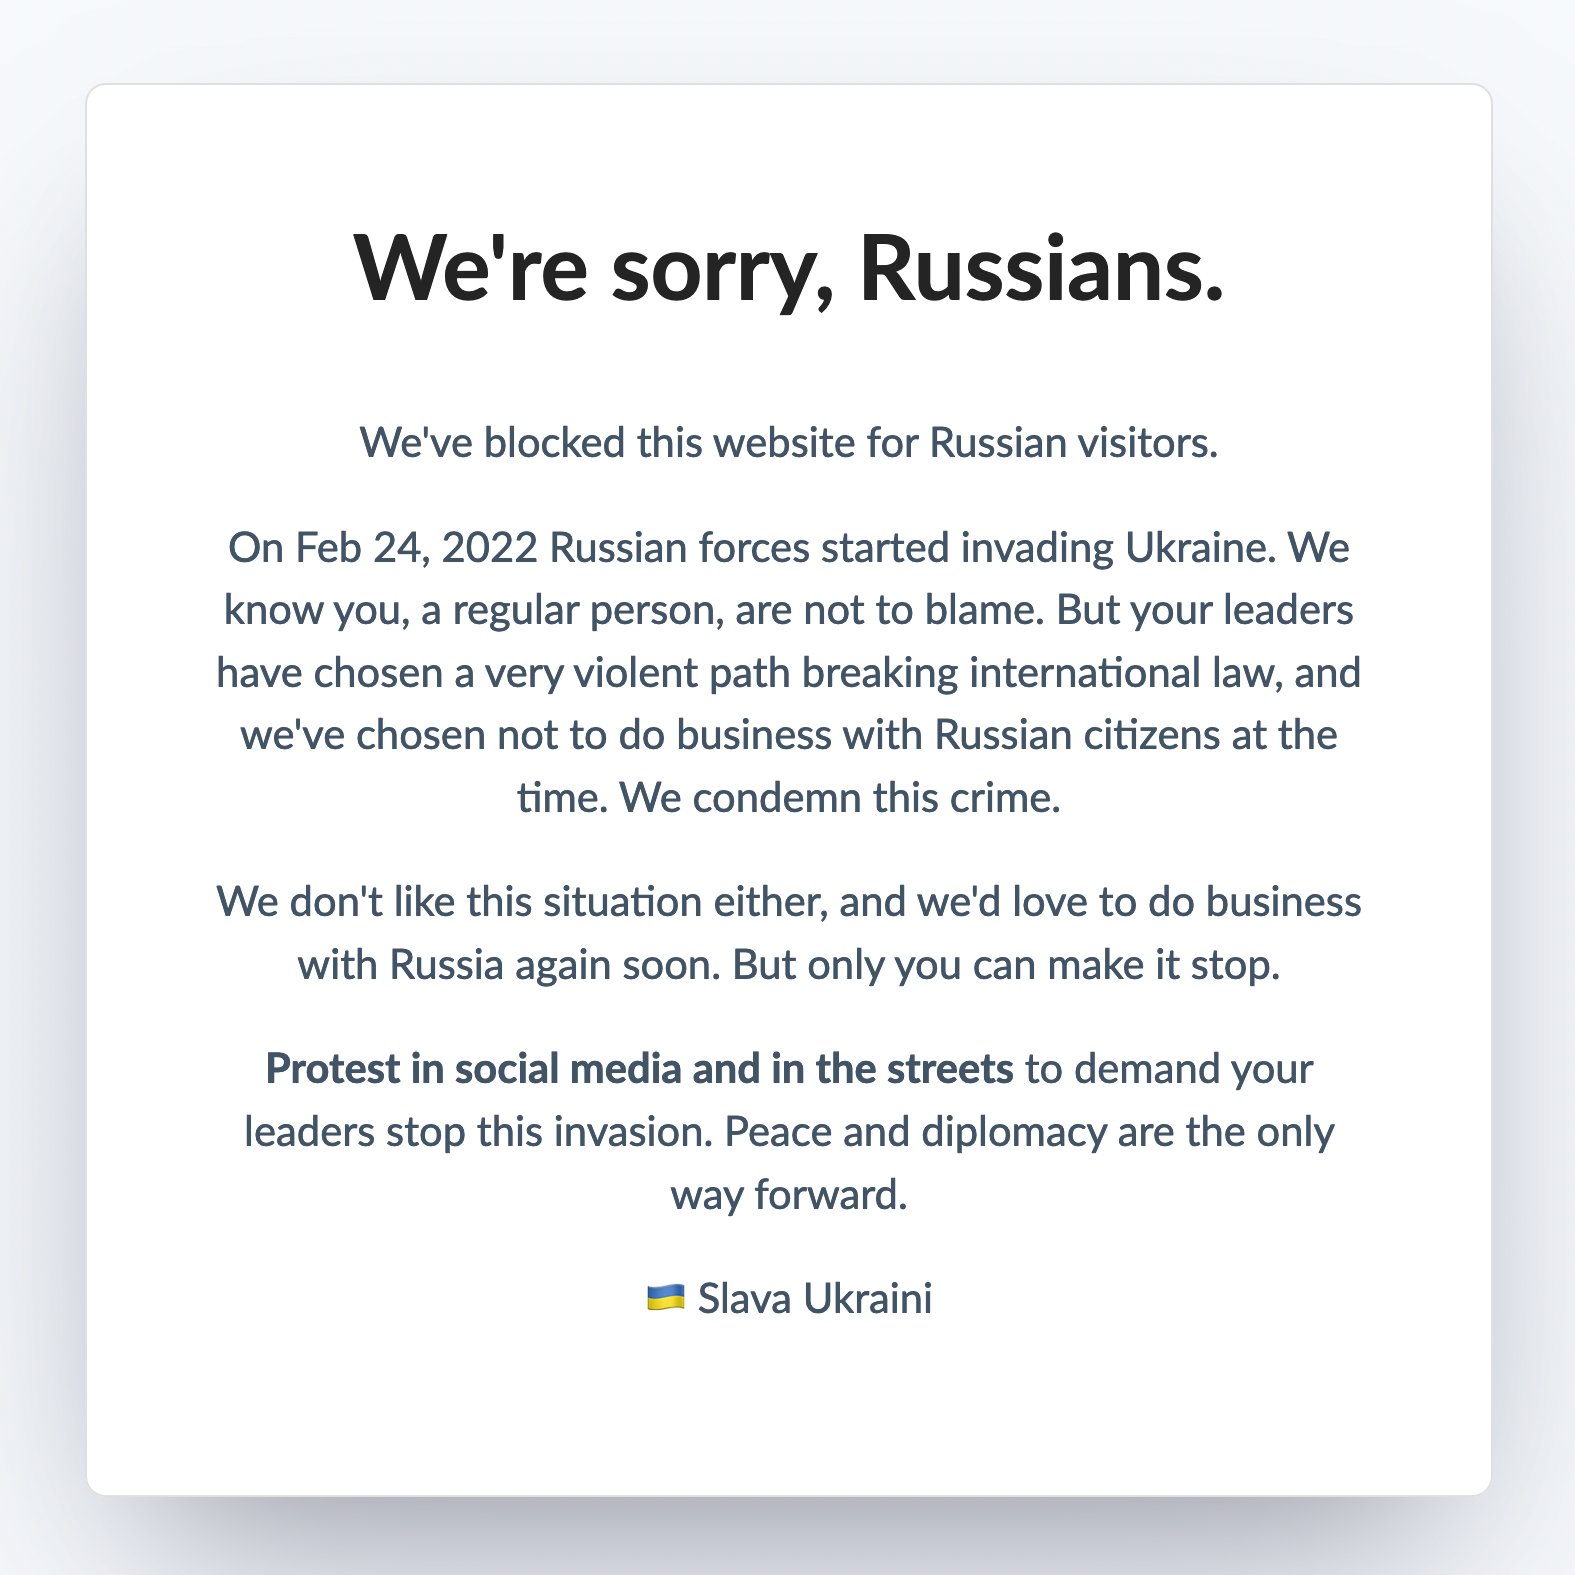 Embargoed message displayed to Russian visitors